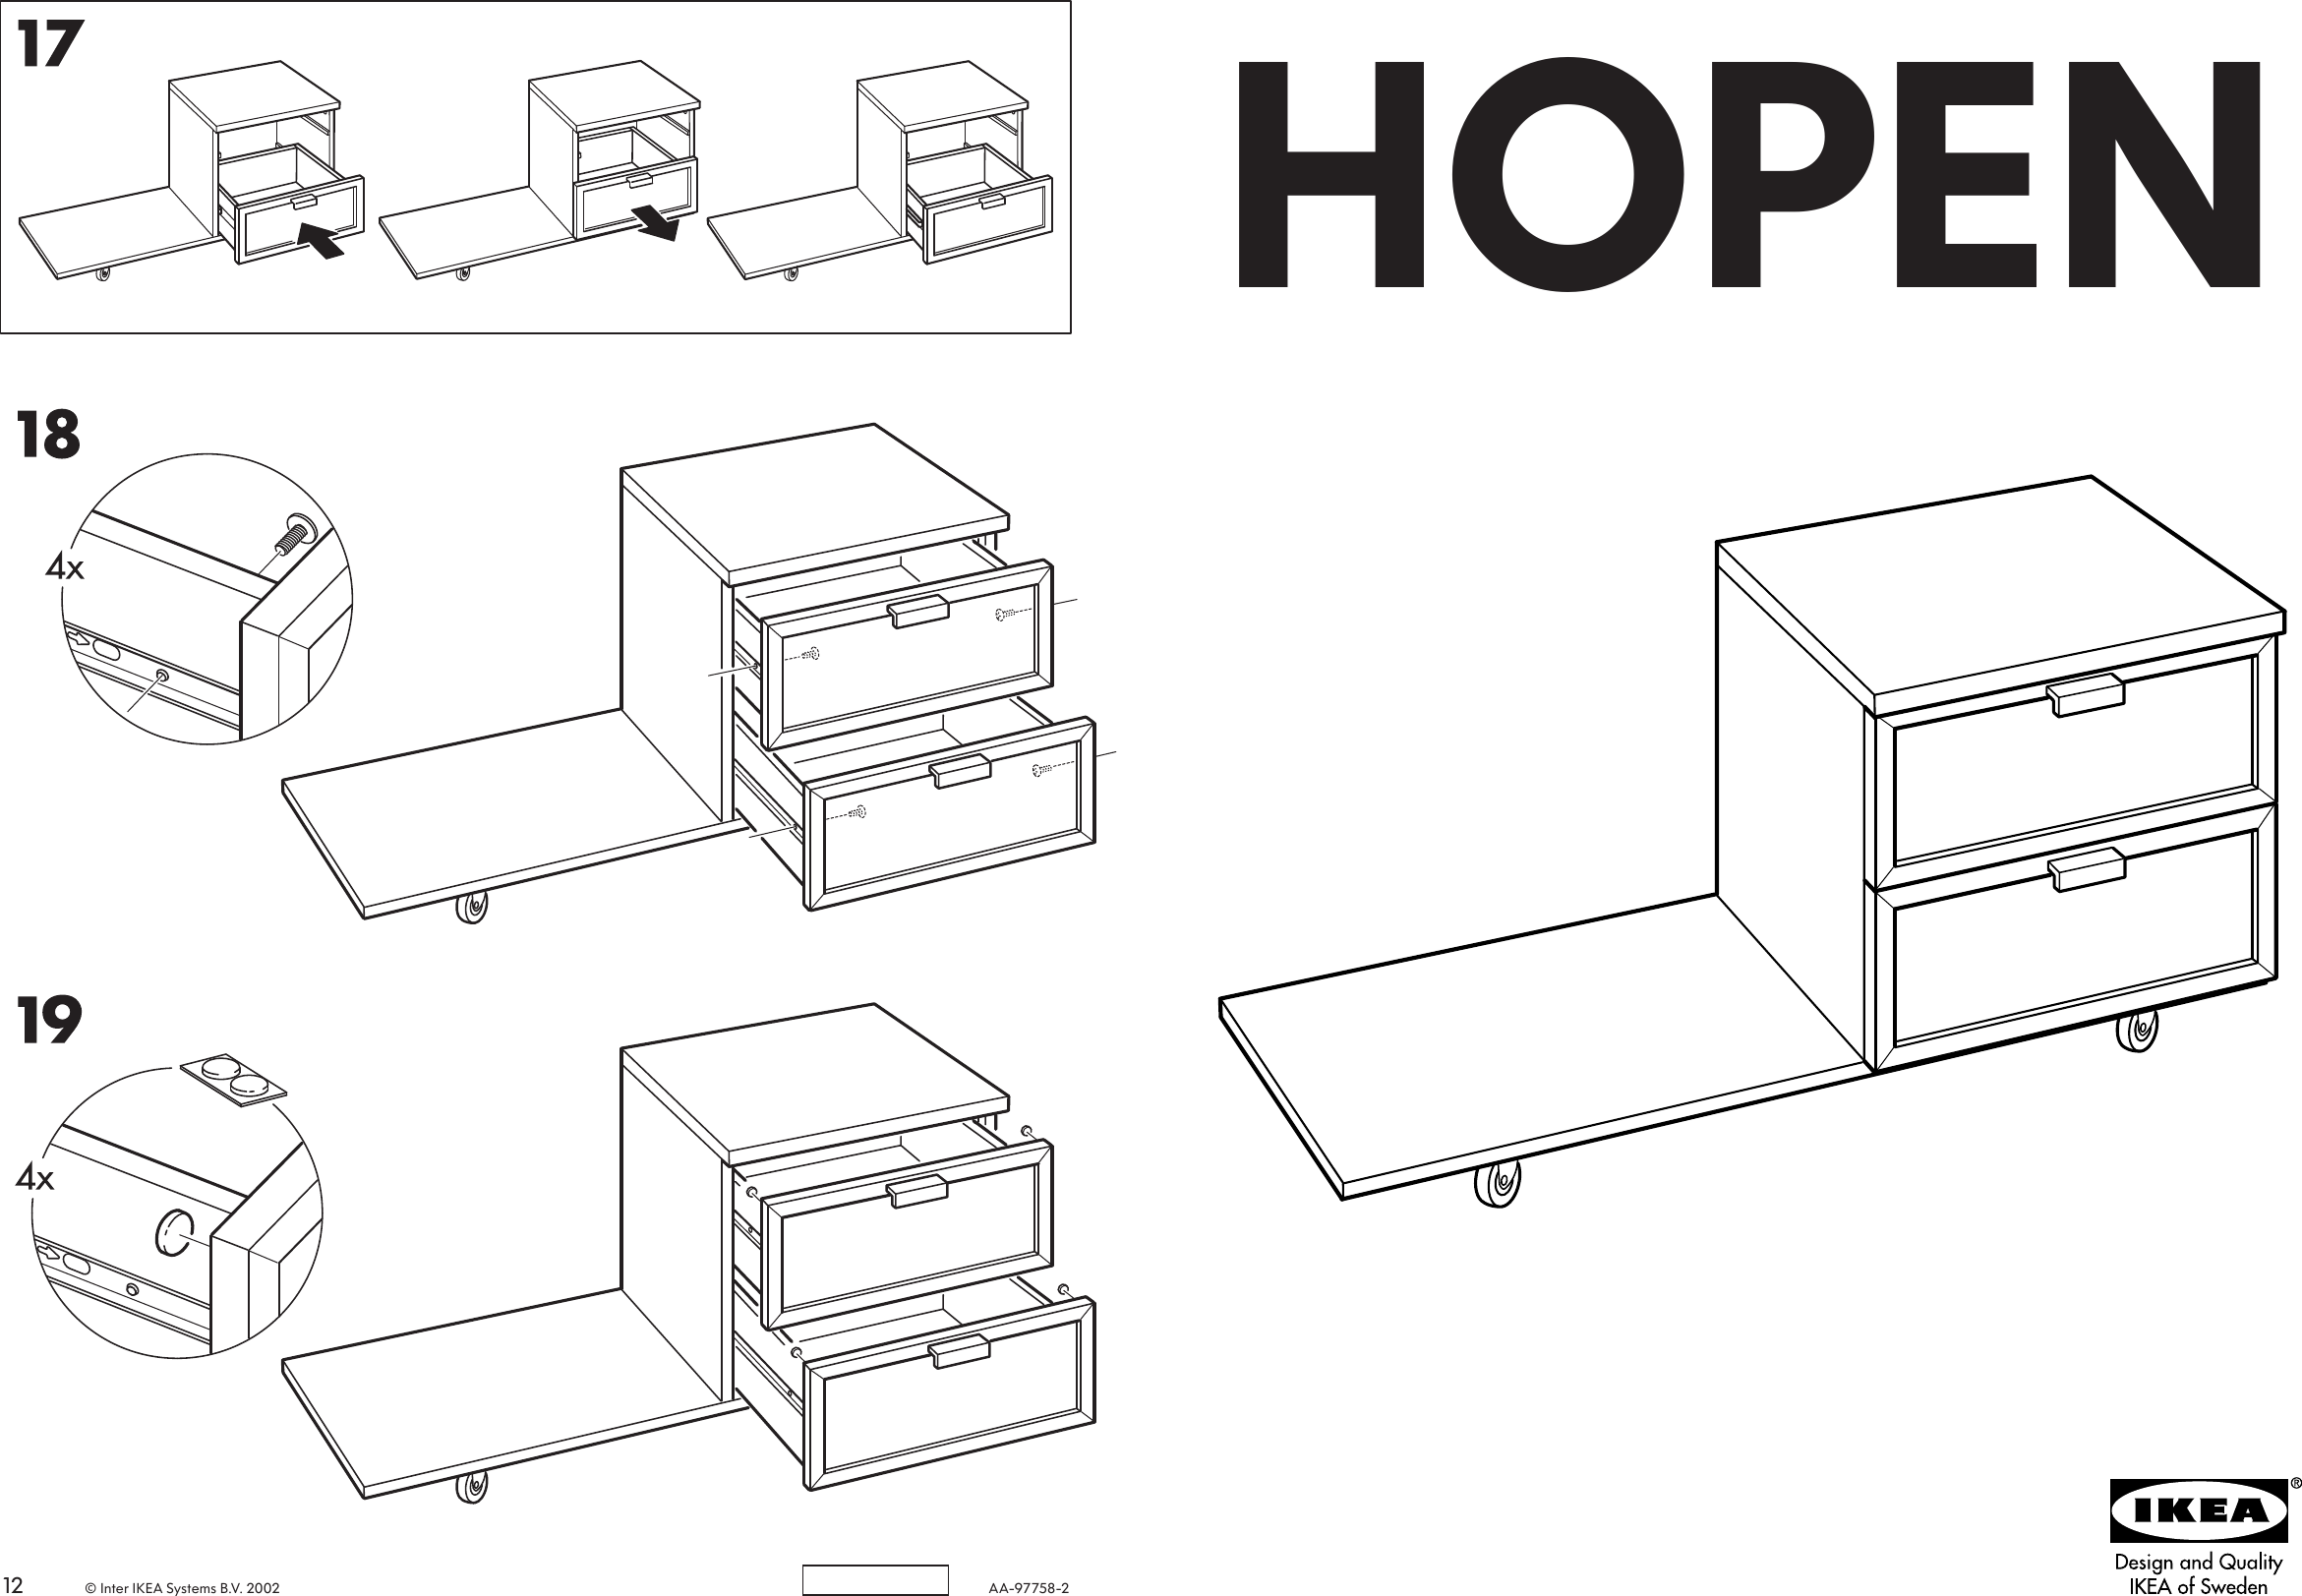 Page 1 of 6 - Ikea Ikea-Hopen-Bedside-Table-39X17-Assembly-Instruction